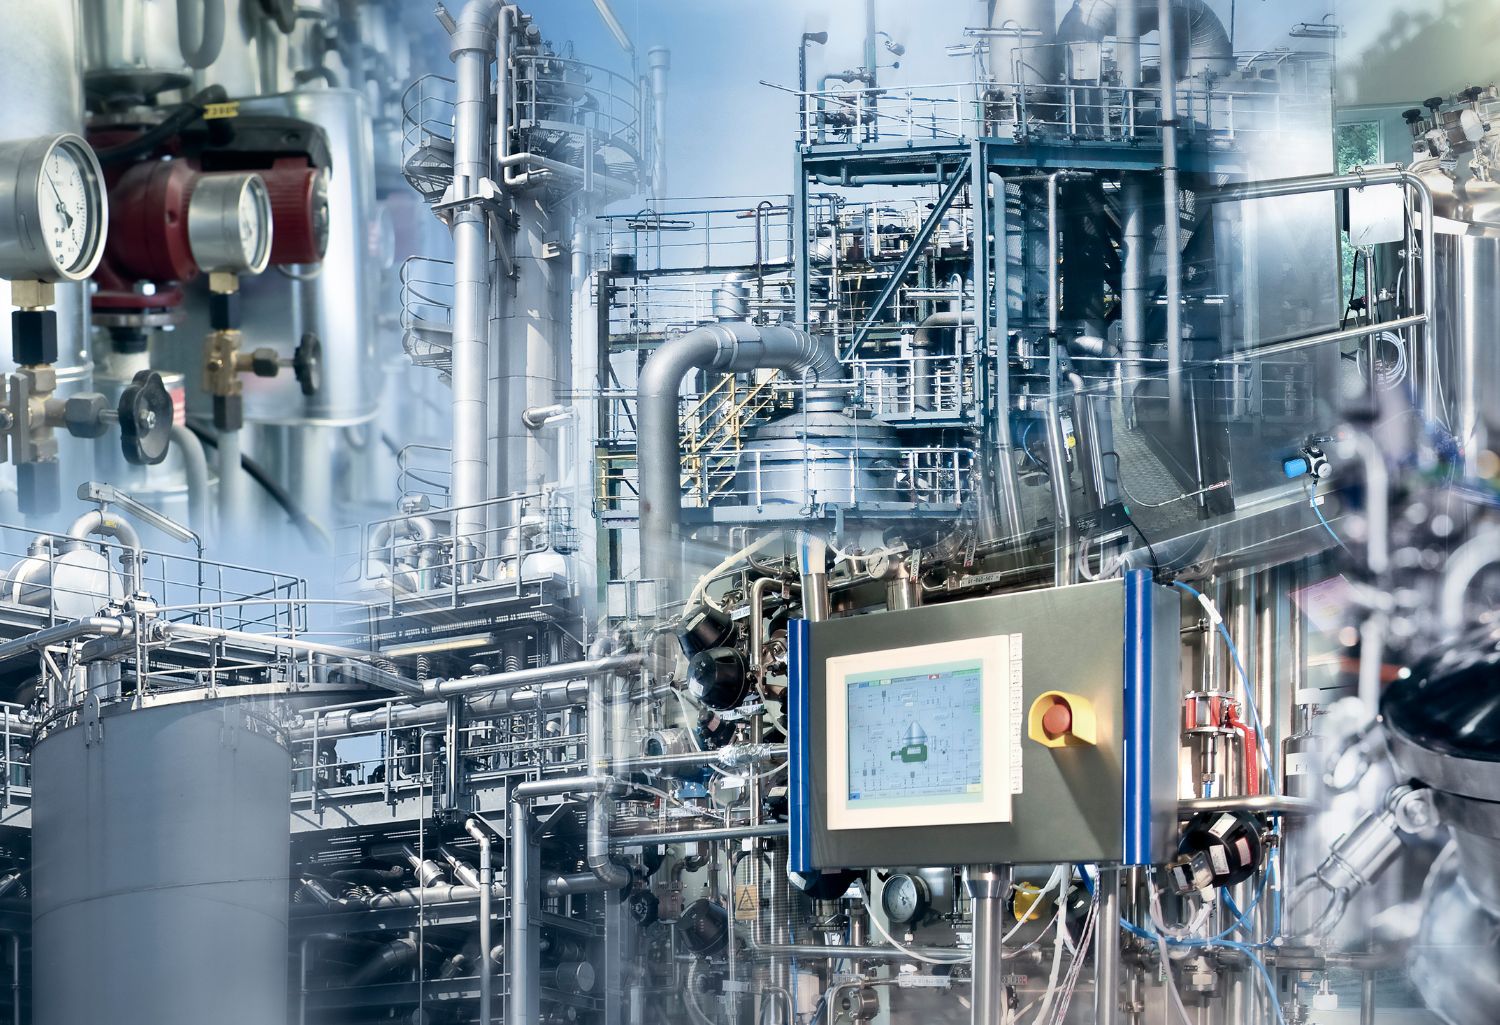 Debt Recovery in Chemical Manufacturing: Production in the chemical and pharmaceutical industry